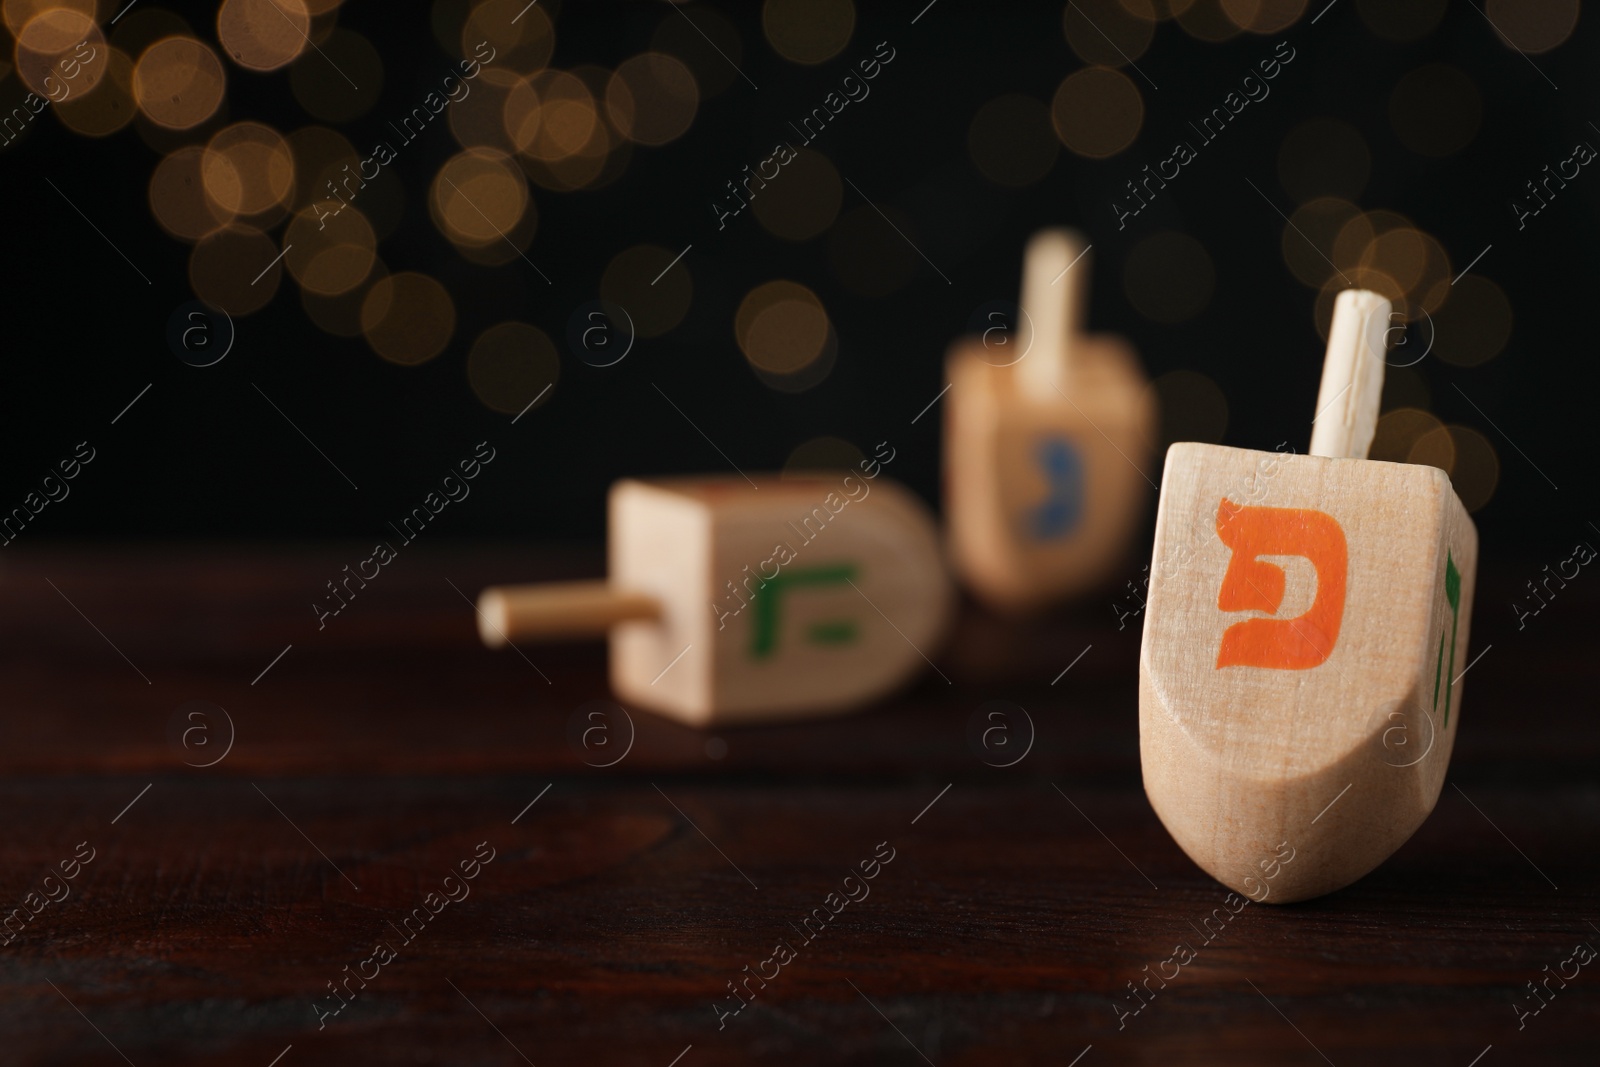 Photo of Hanukkah traditional dreidel with letter Pe on wooden table against blurred lights. Space for text